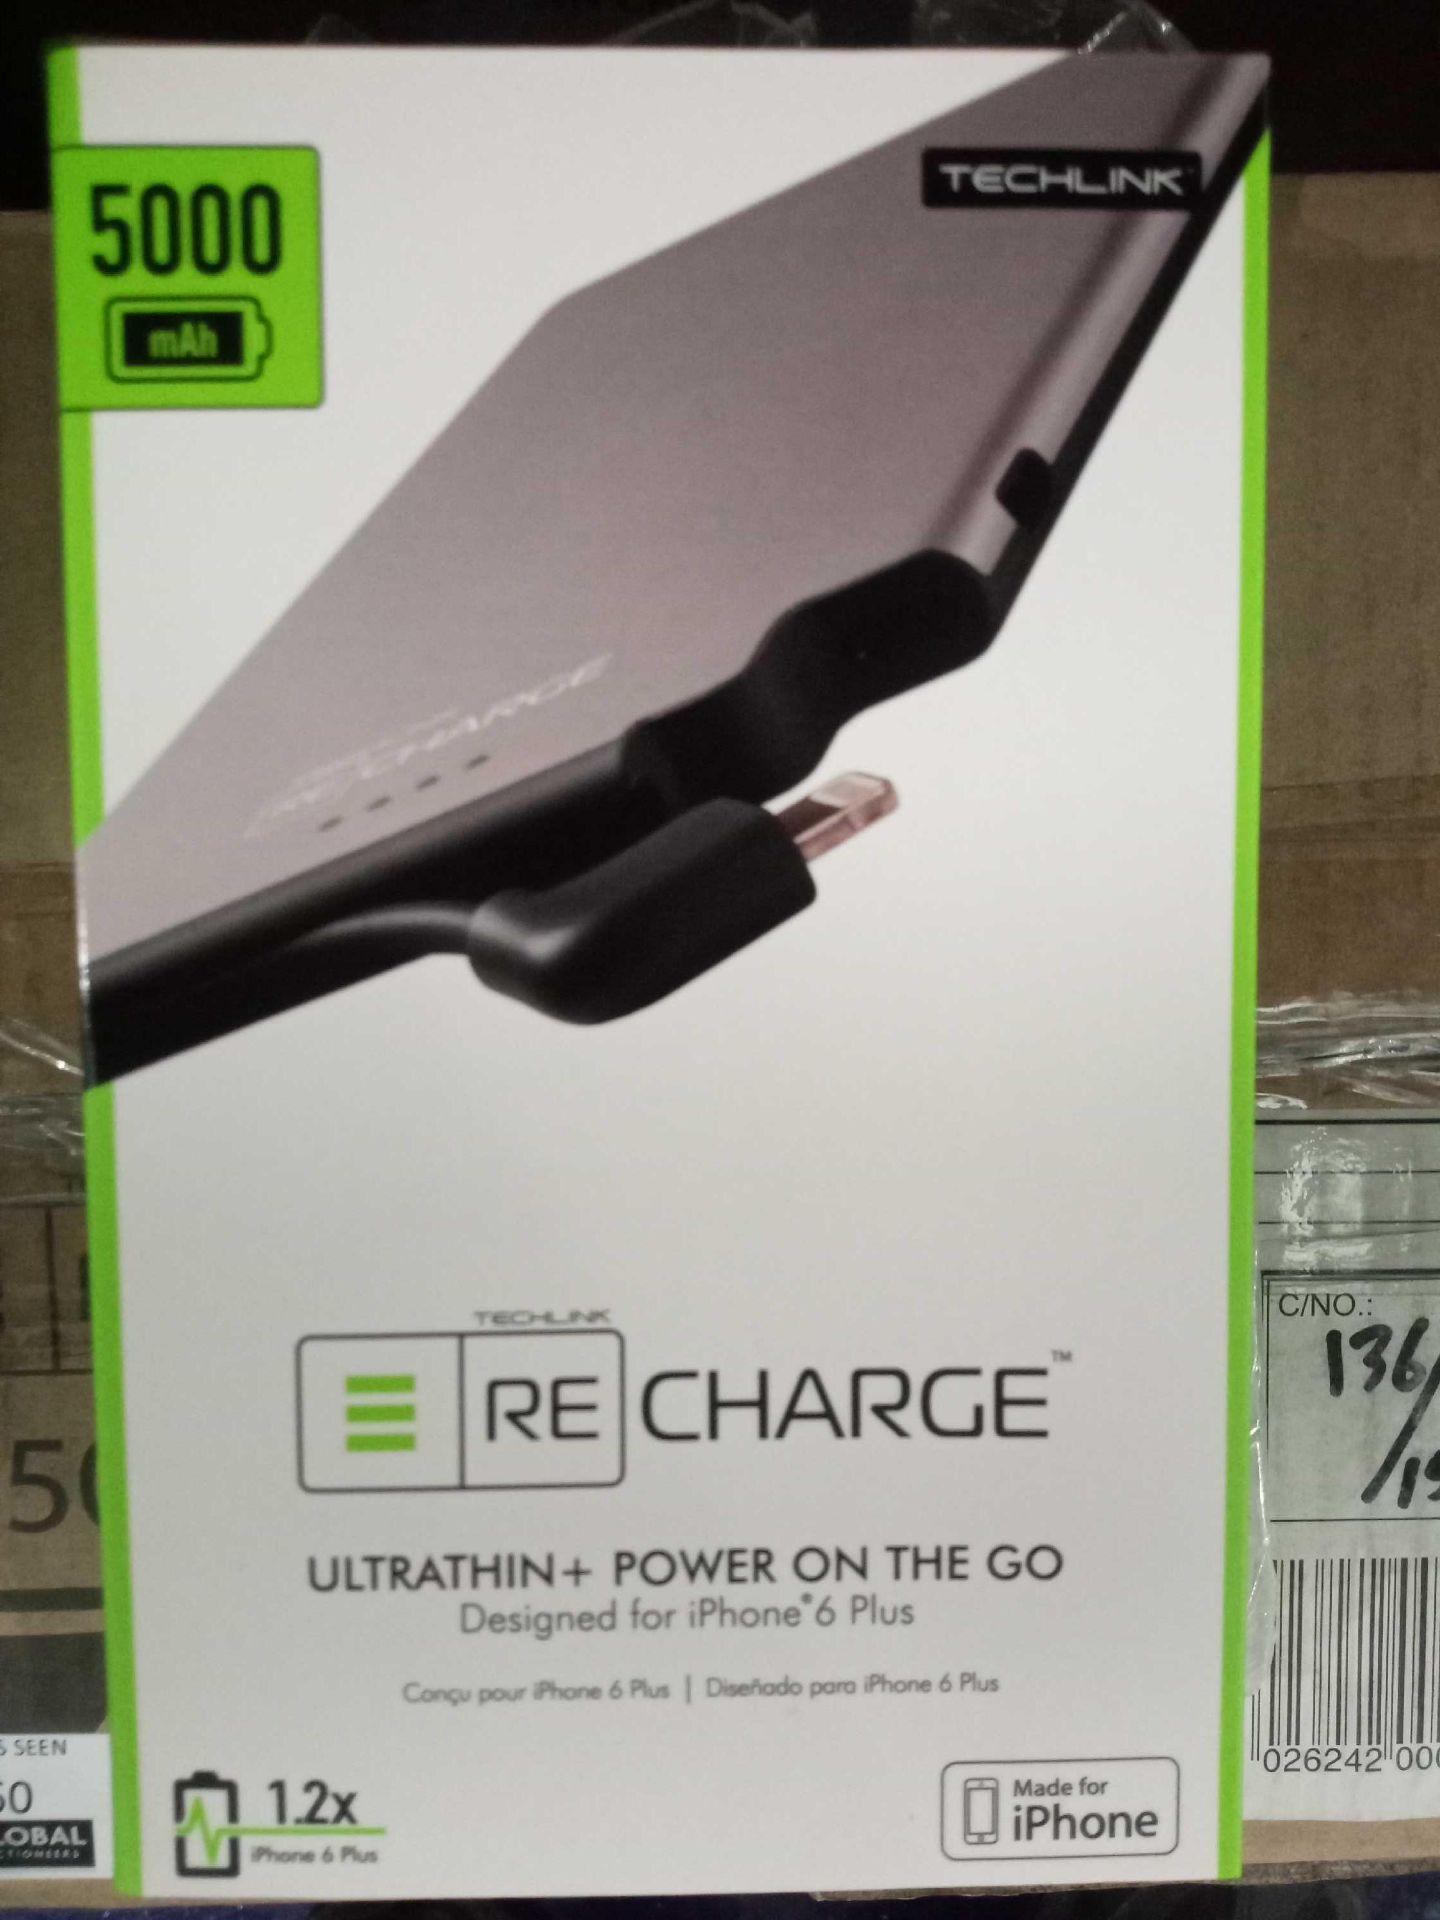 Lot to contain 8 techlink 5000 man power banks desgined for iphone